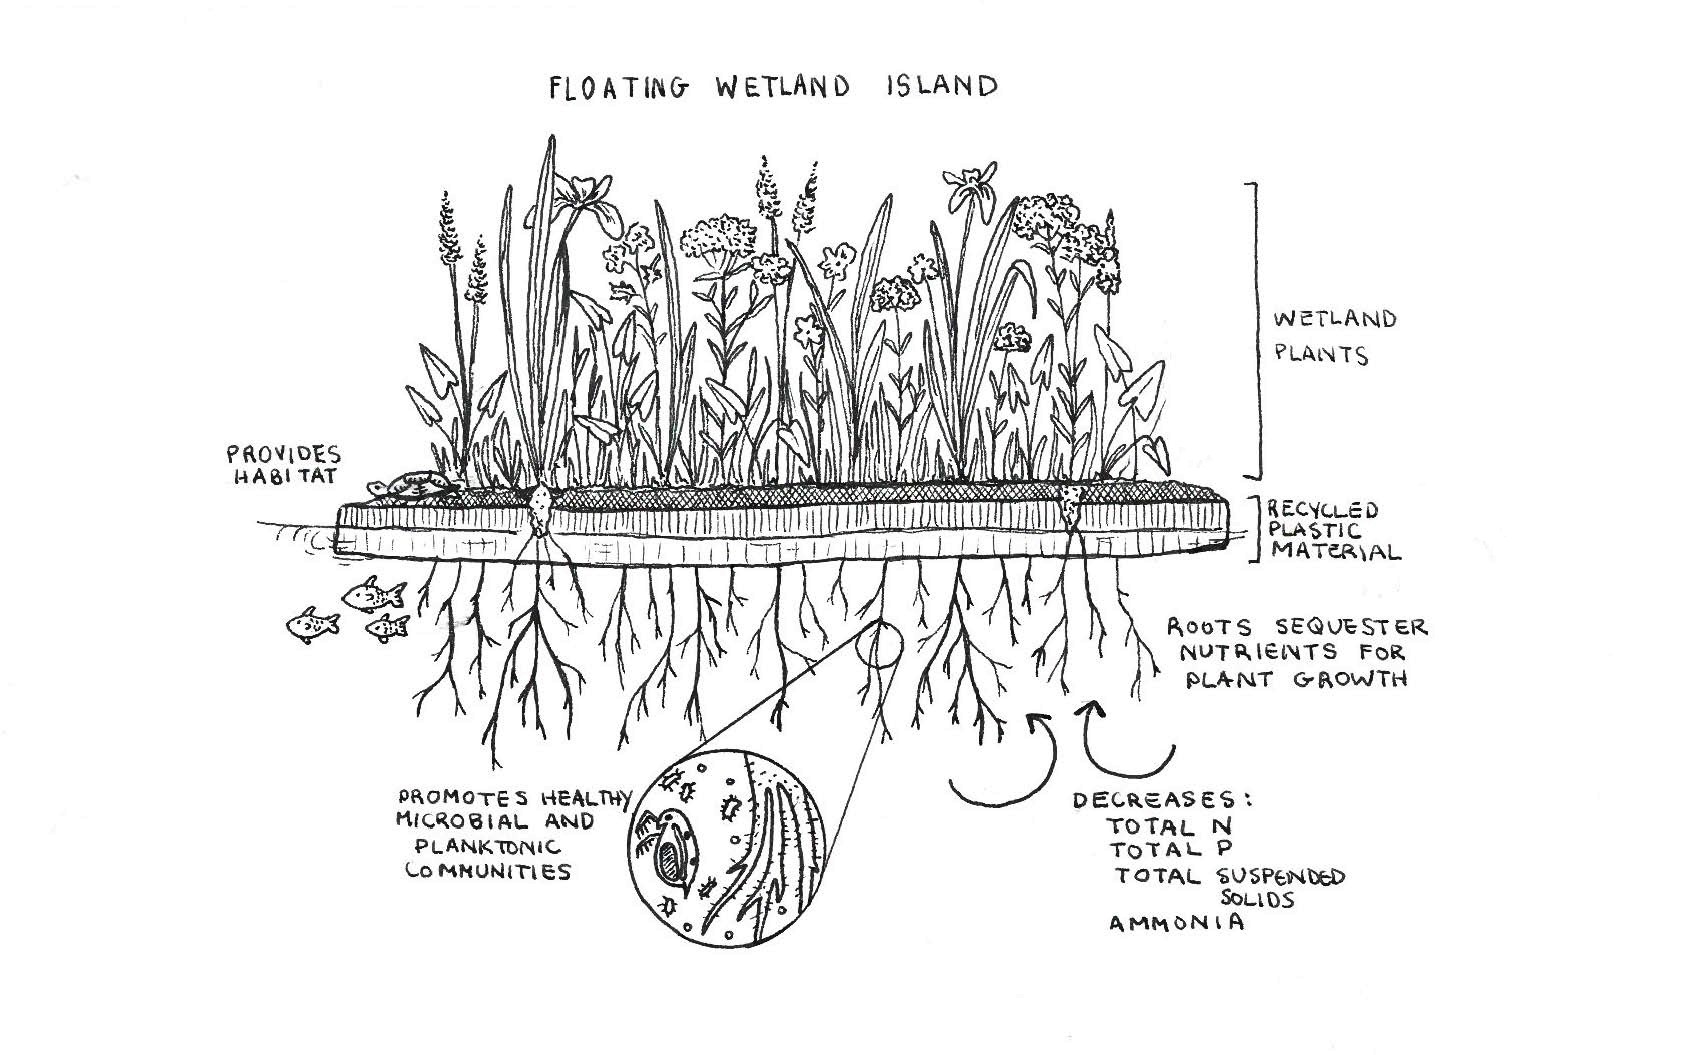 This illustration, created by Staff Scientist Ivy Babson, conveys the functionality of a Floating Wetland Island